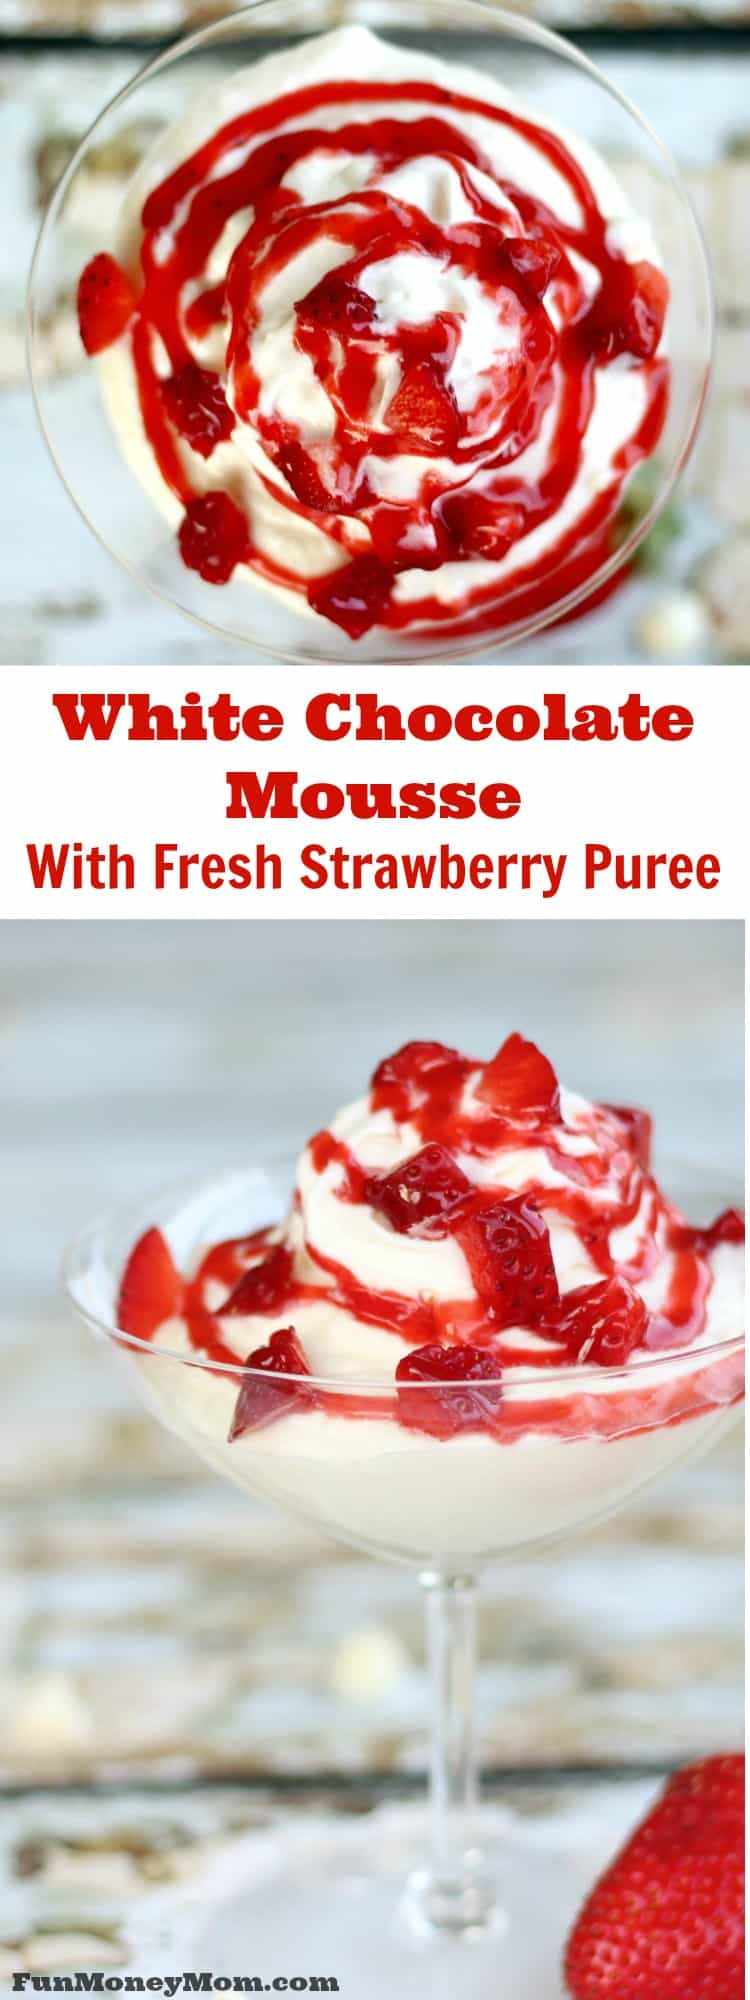 Want the best ever chocolate dessert? This mouthwatering white chocolate mousse with strawberry puree will be your new favorite treat!